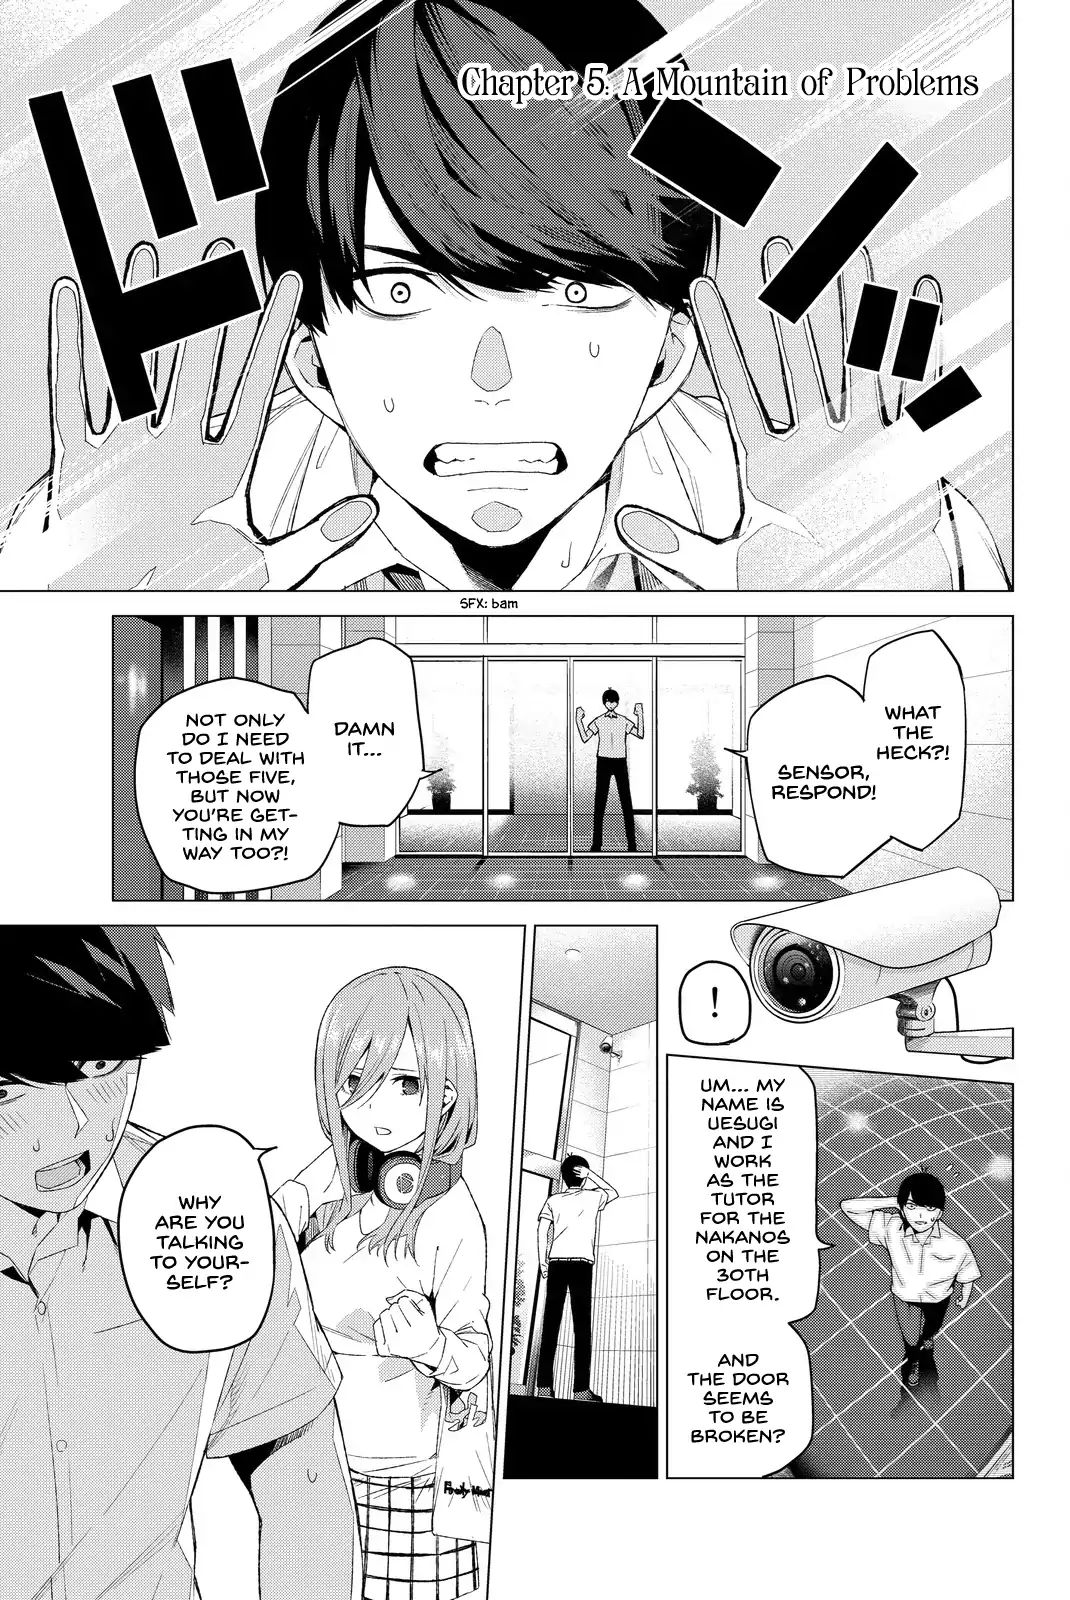 Go-Toubun No Hanayome Vol.1 Chapter 5: A Mountain Of Problems - Picture 1